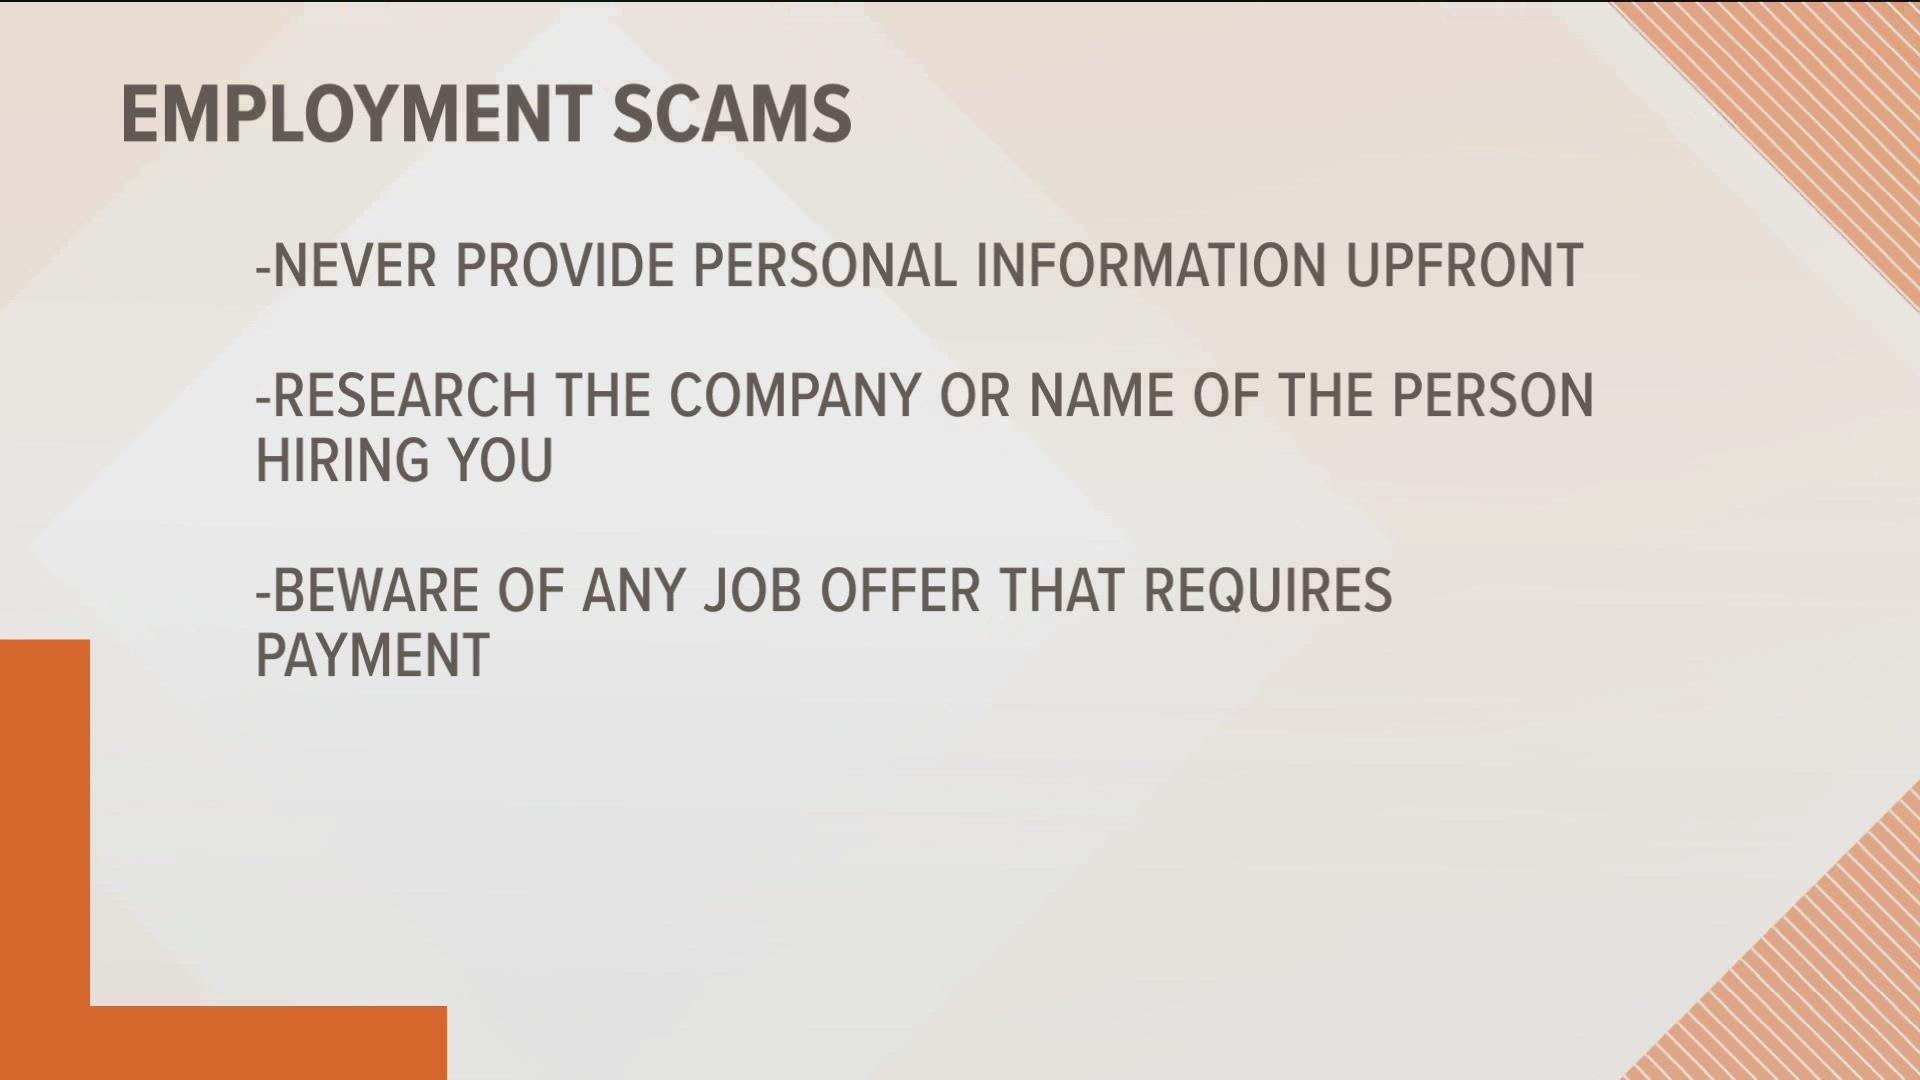 The Idaho Department of Finance is telling people to look out for employment scams.